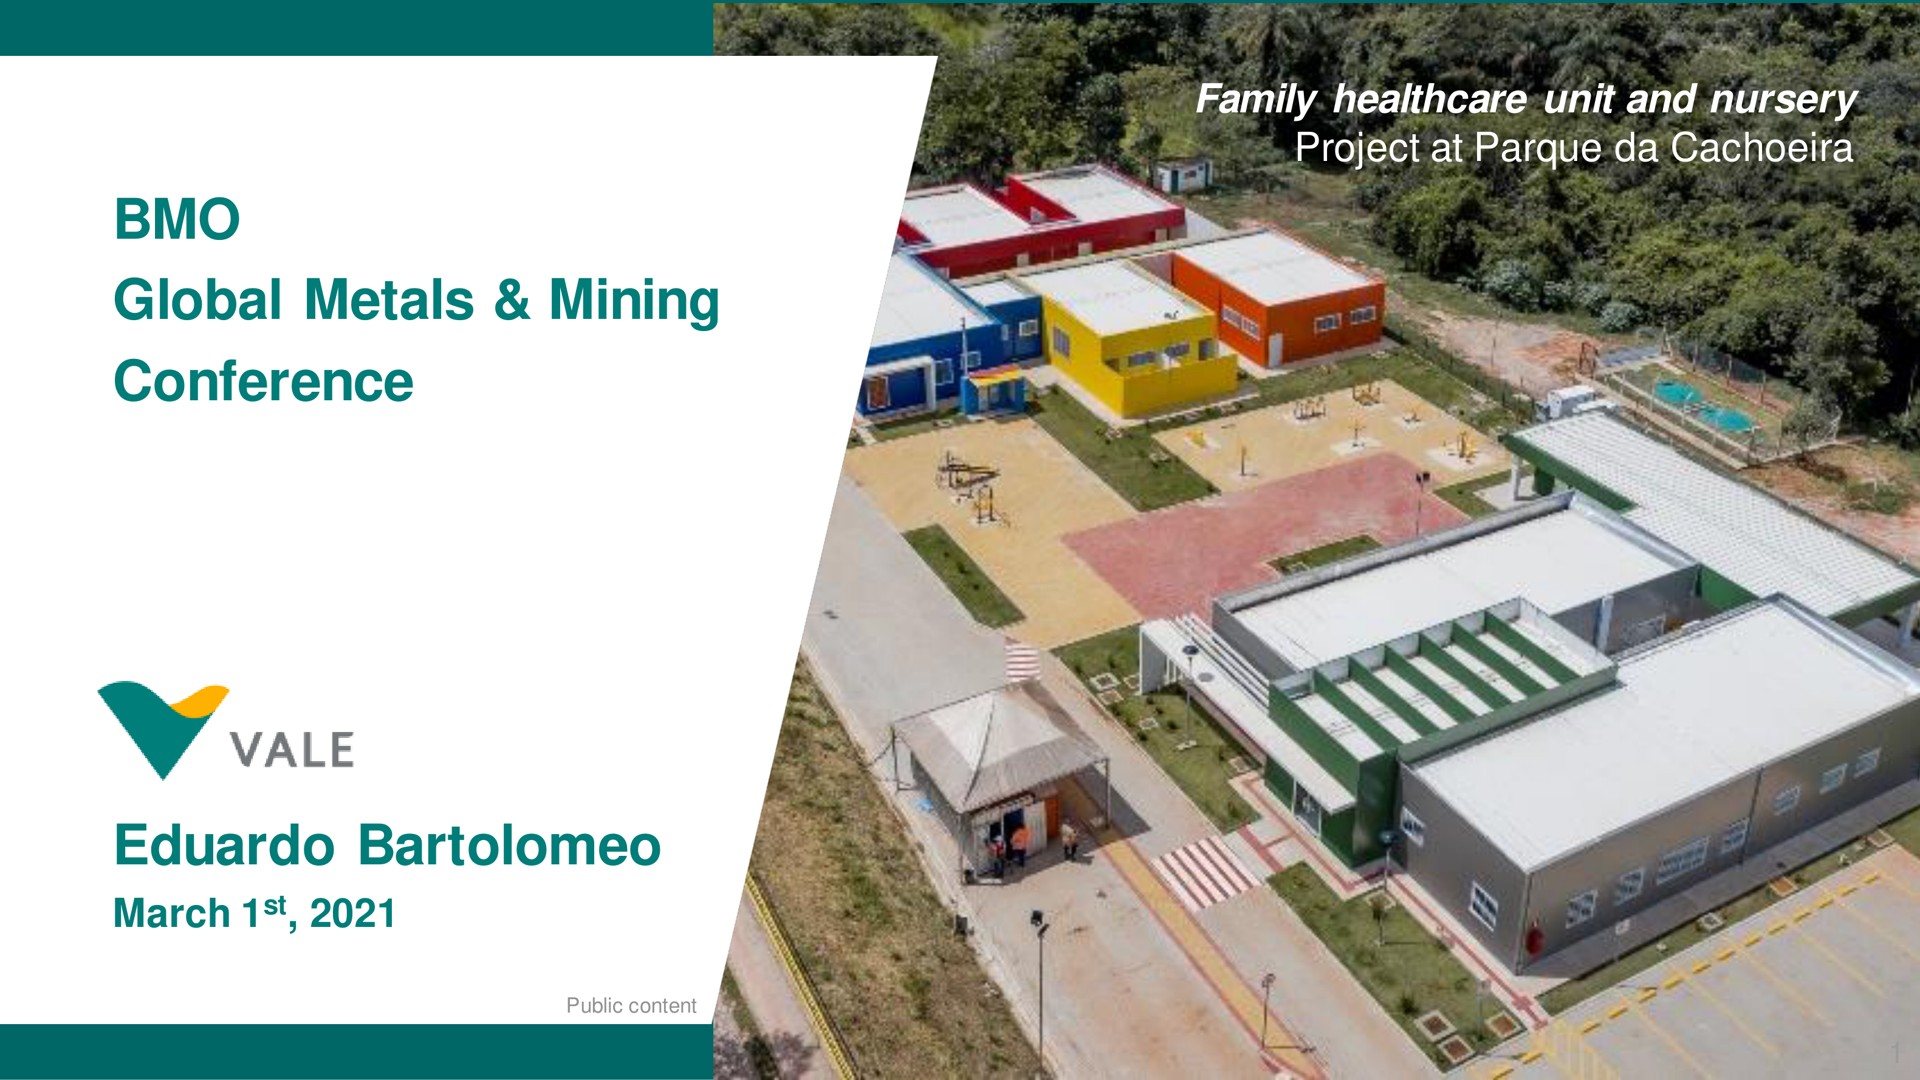 global metals mining conference march family unit and nursery project at unit vale | Vale